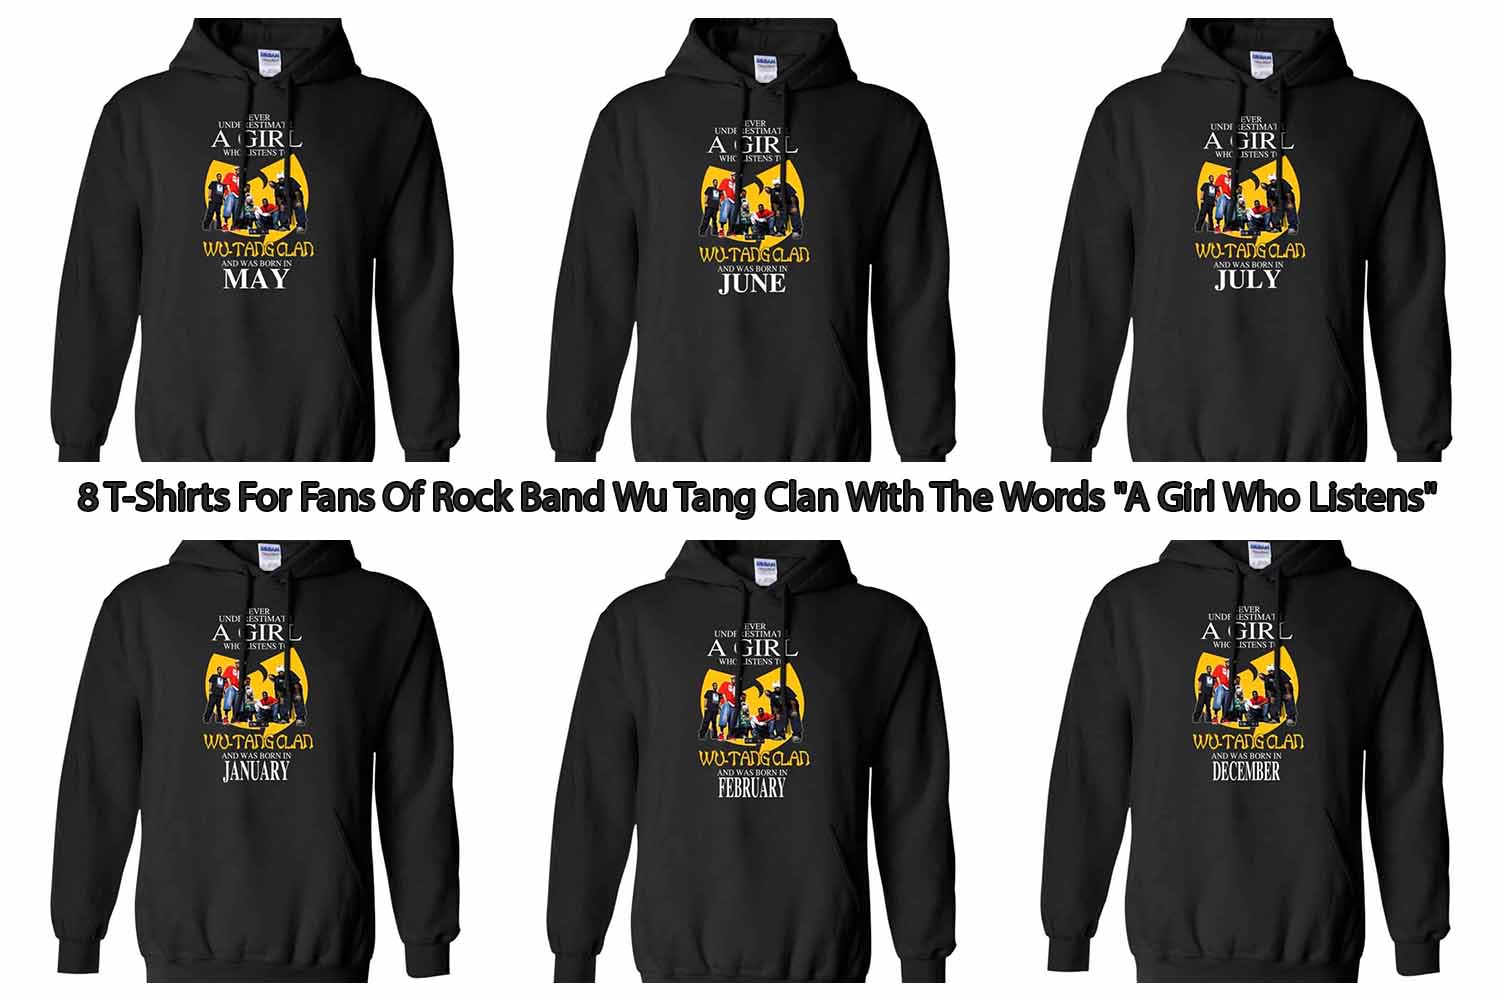 8 T-Shirts For Fans Of Rock Band Wu Tang Clan With The Words "A Girl Who Listens"